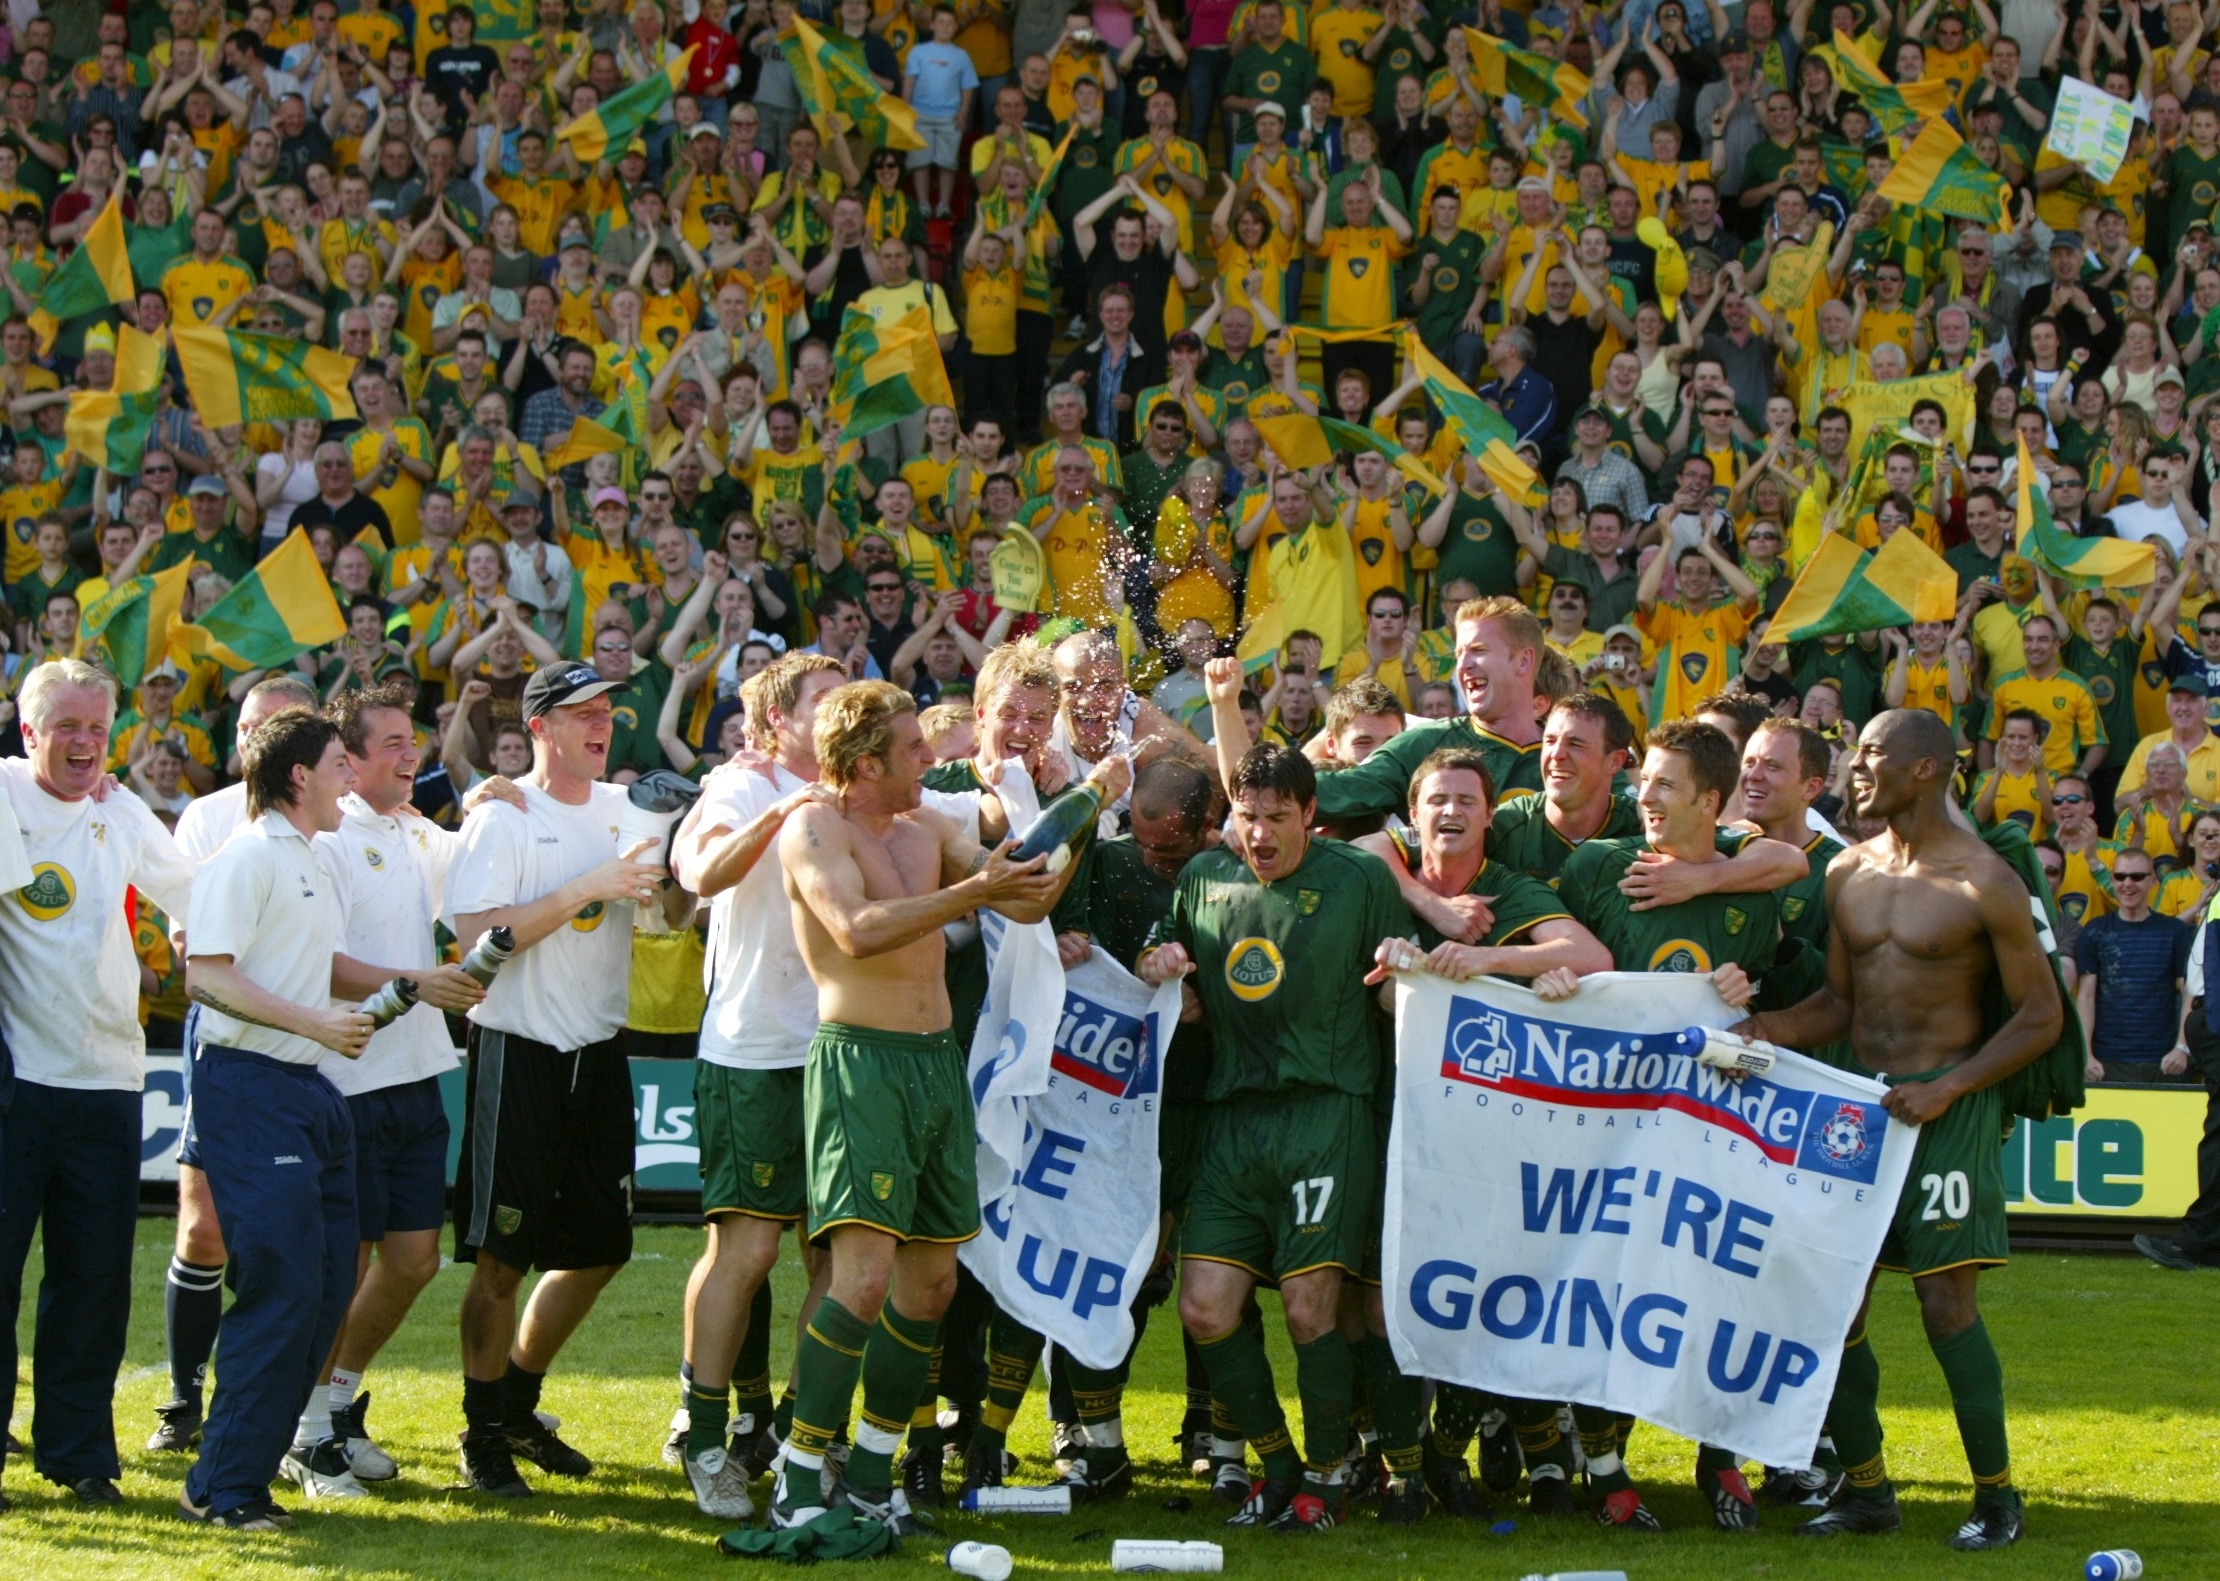 Football - Nationwide League Division One - Watford v Norwich City - Vicarage Road - 24/4/04
Norwich players celebrate promotion to the Premiership